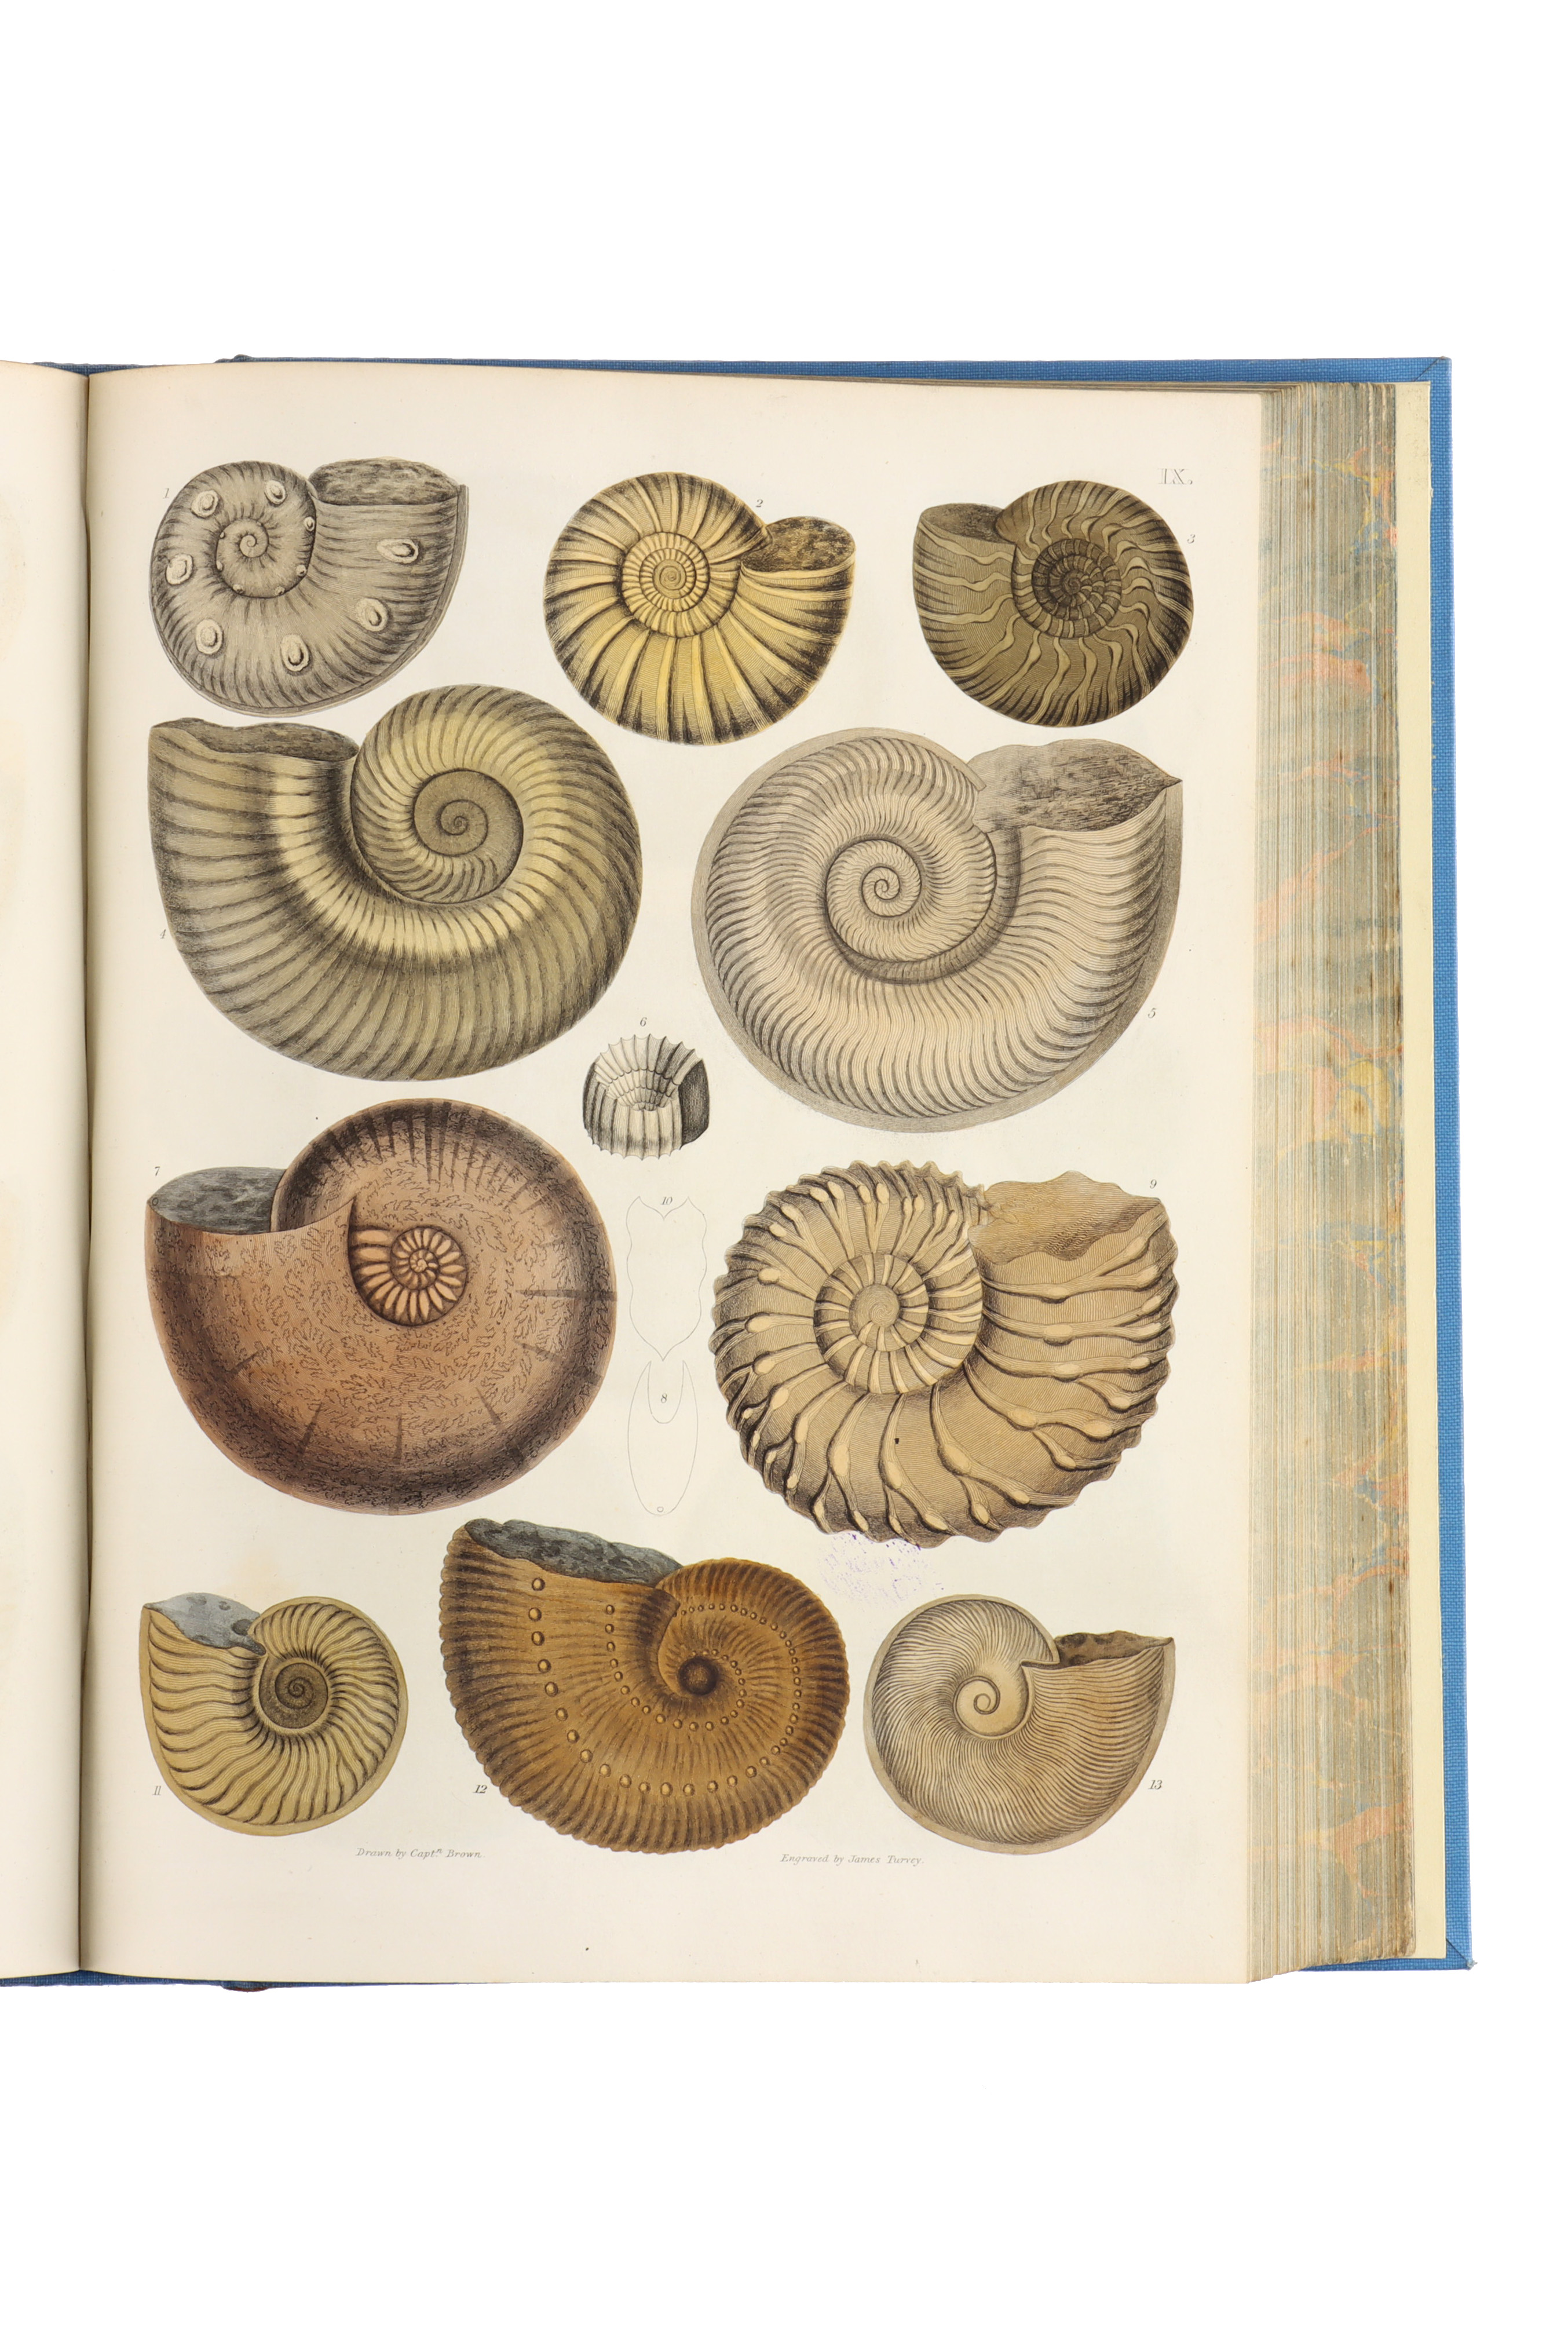 Brown, Captain Thomas, Illustrations of the Fossil Conchology of Great Britain, - Image 5 of 9